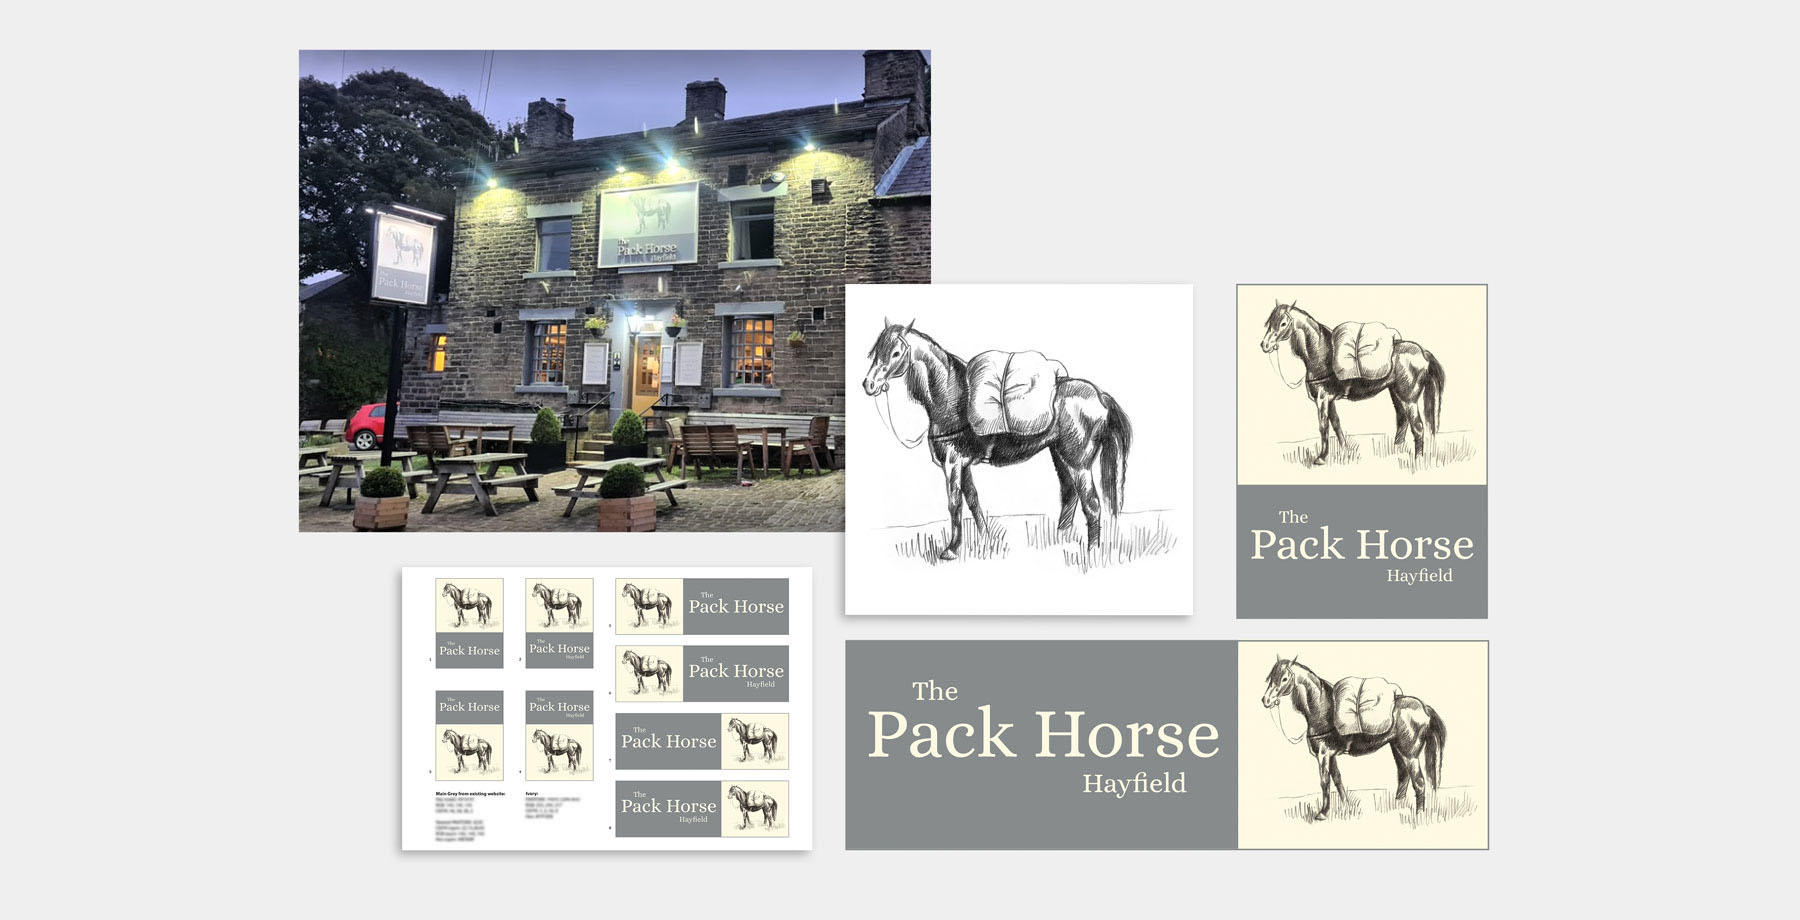 The Pack Horse Hayfield